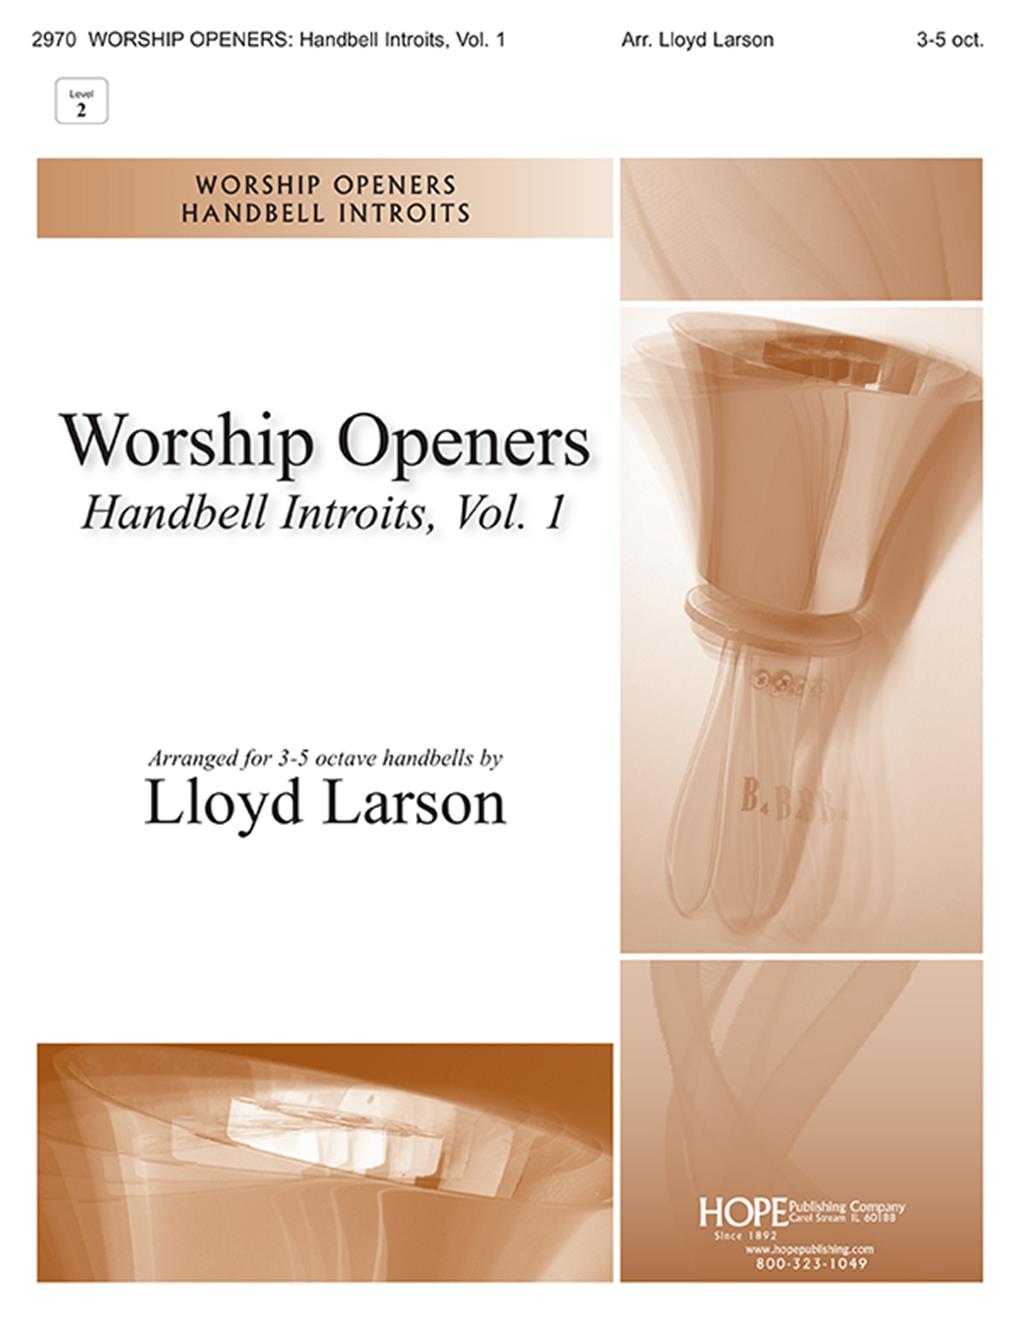 WORSHIP OPENERS: Handbell Introits Vol 1 Cover Image